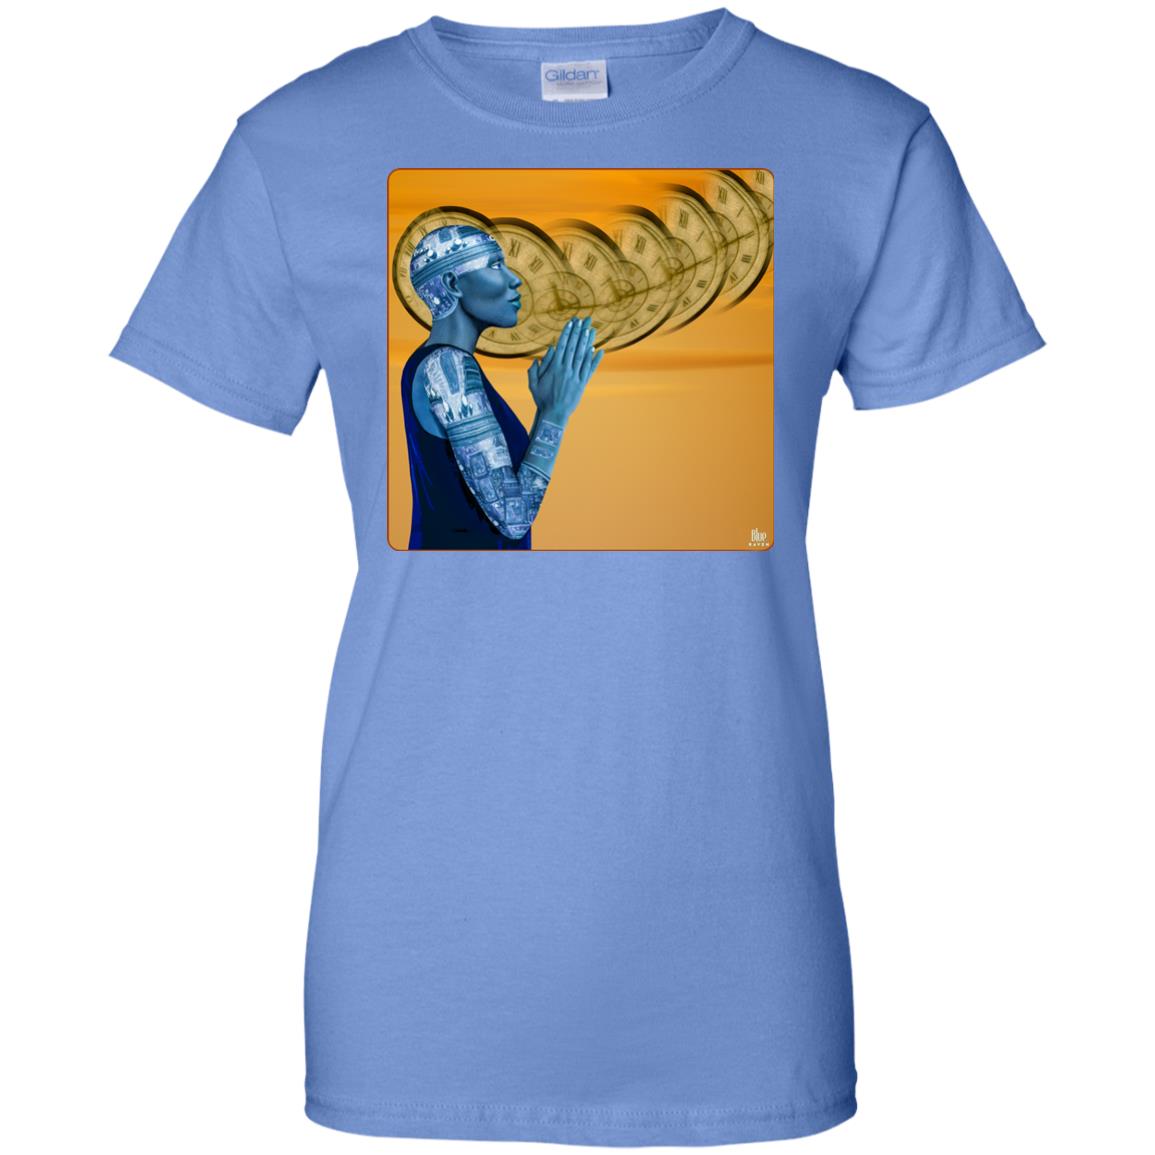 the seer - Women's Relaxed Fit T-Shirt